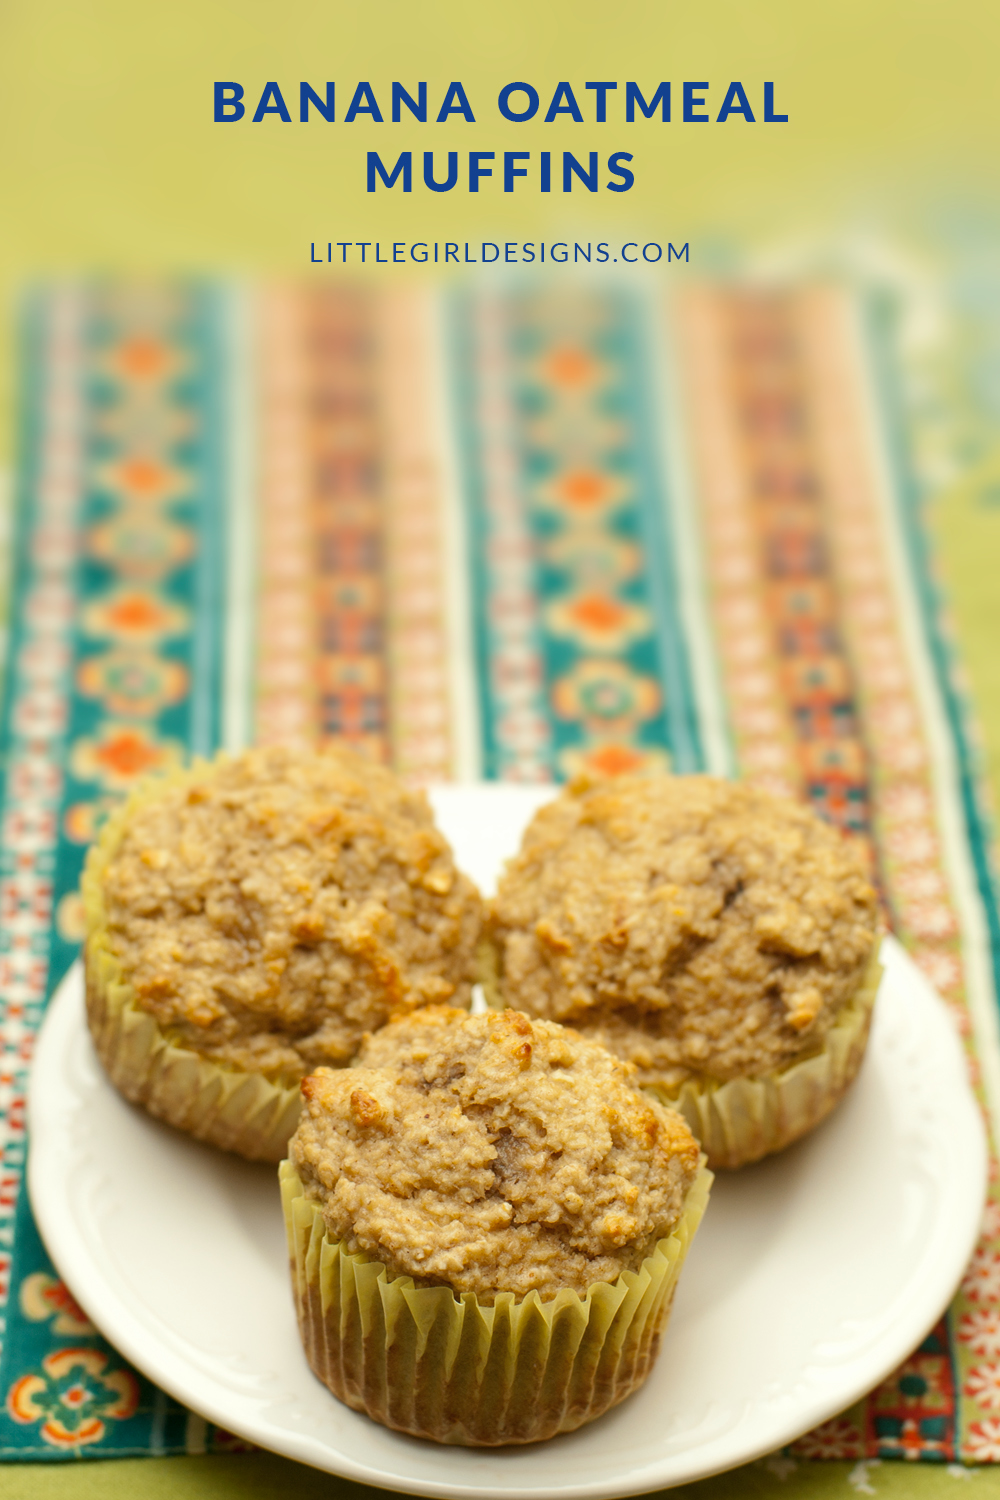 Delicious, sugar-free and gluten-free (if you use gf oats!) banana oatmeal muffins for you and your munchkin @ littlegirldesigns.com.